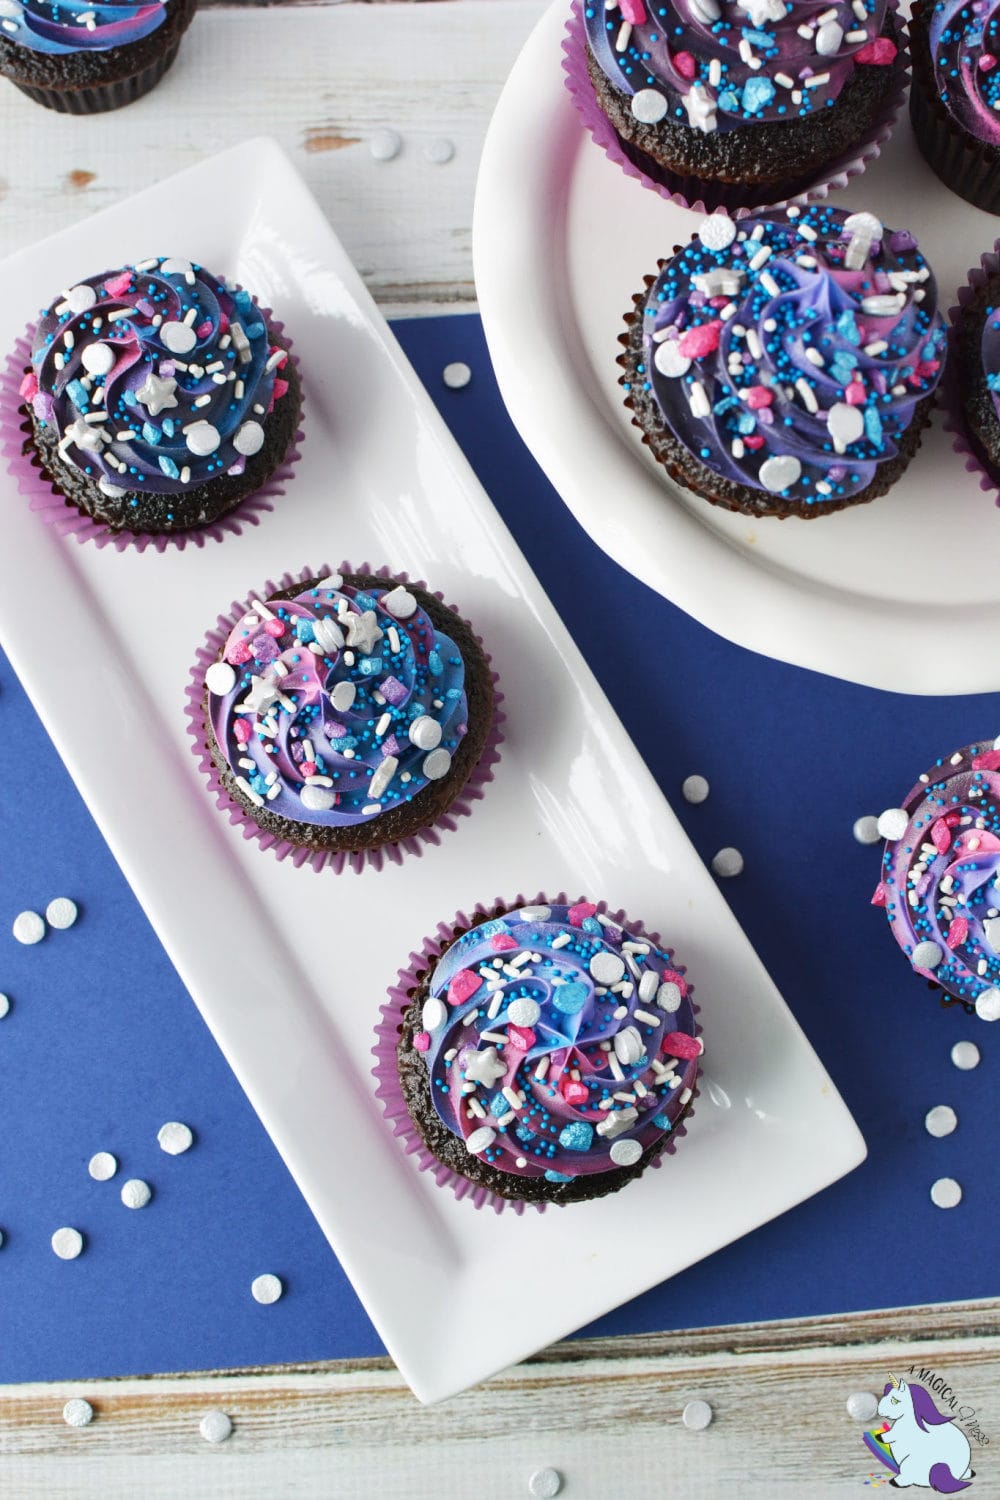 Purple, blue, and pink galaxy cupcakes.